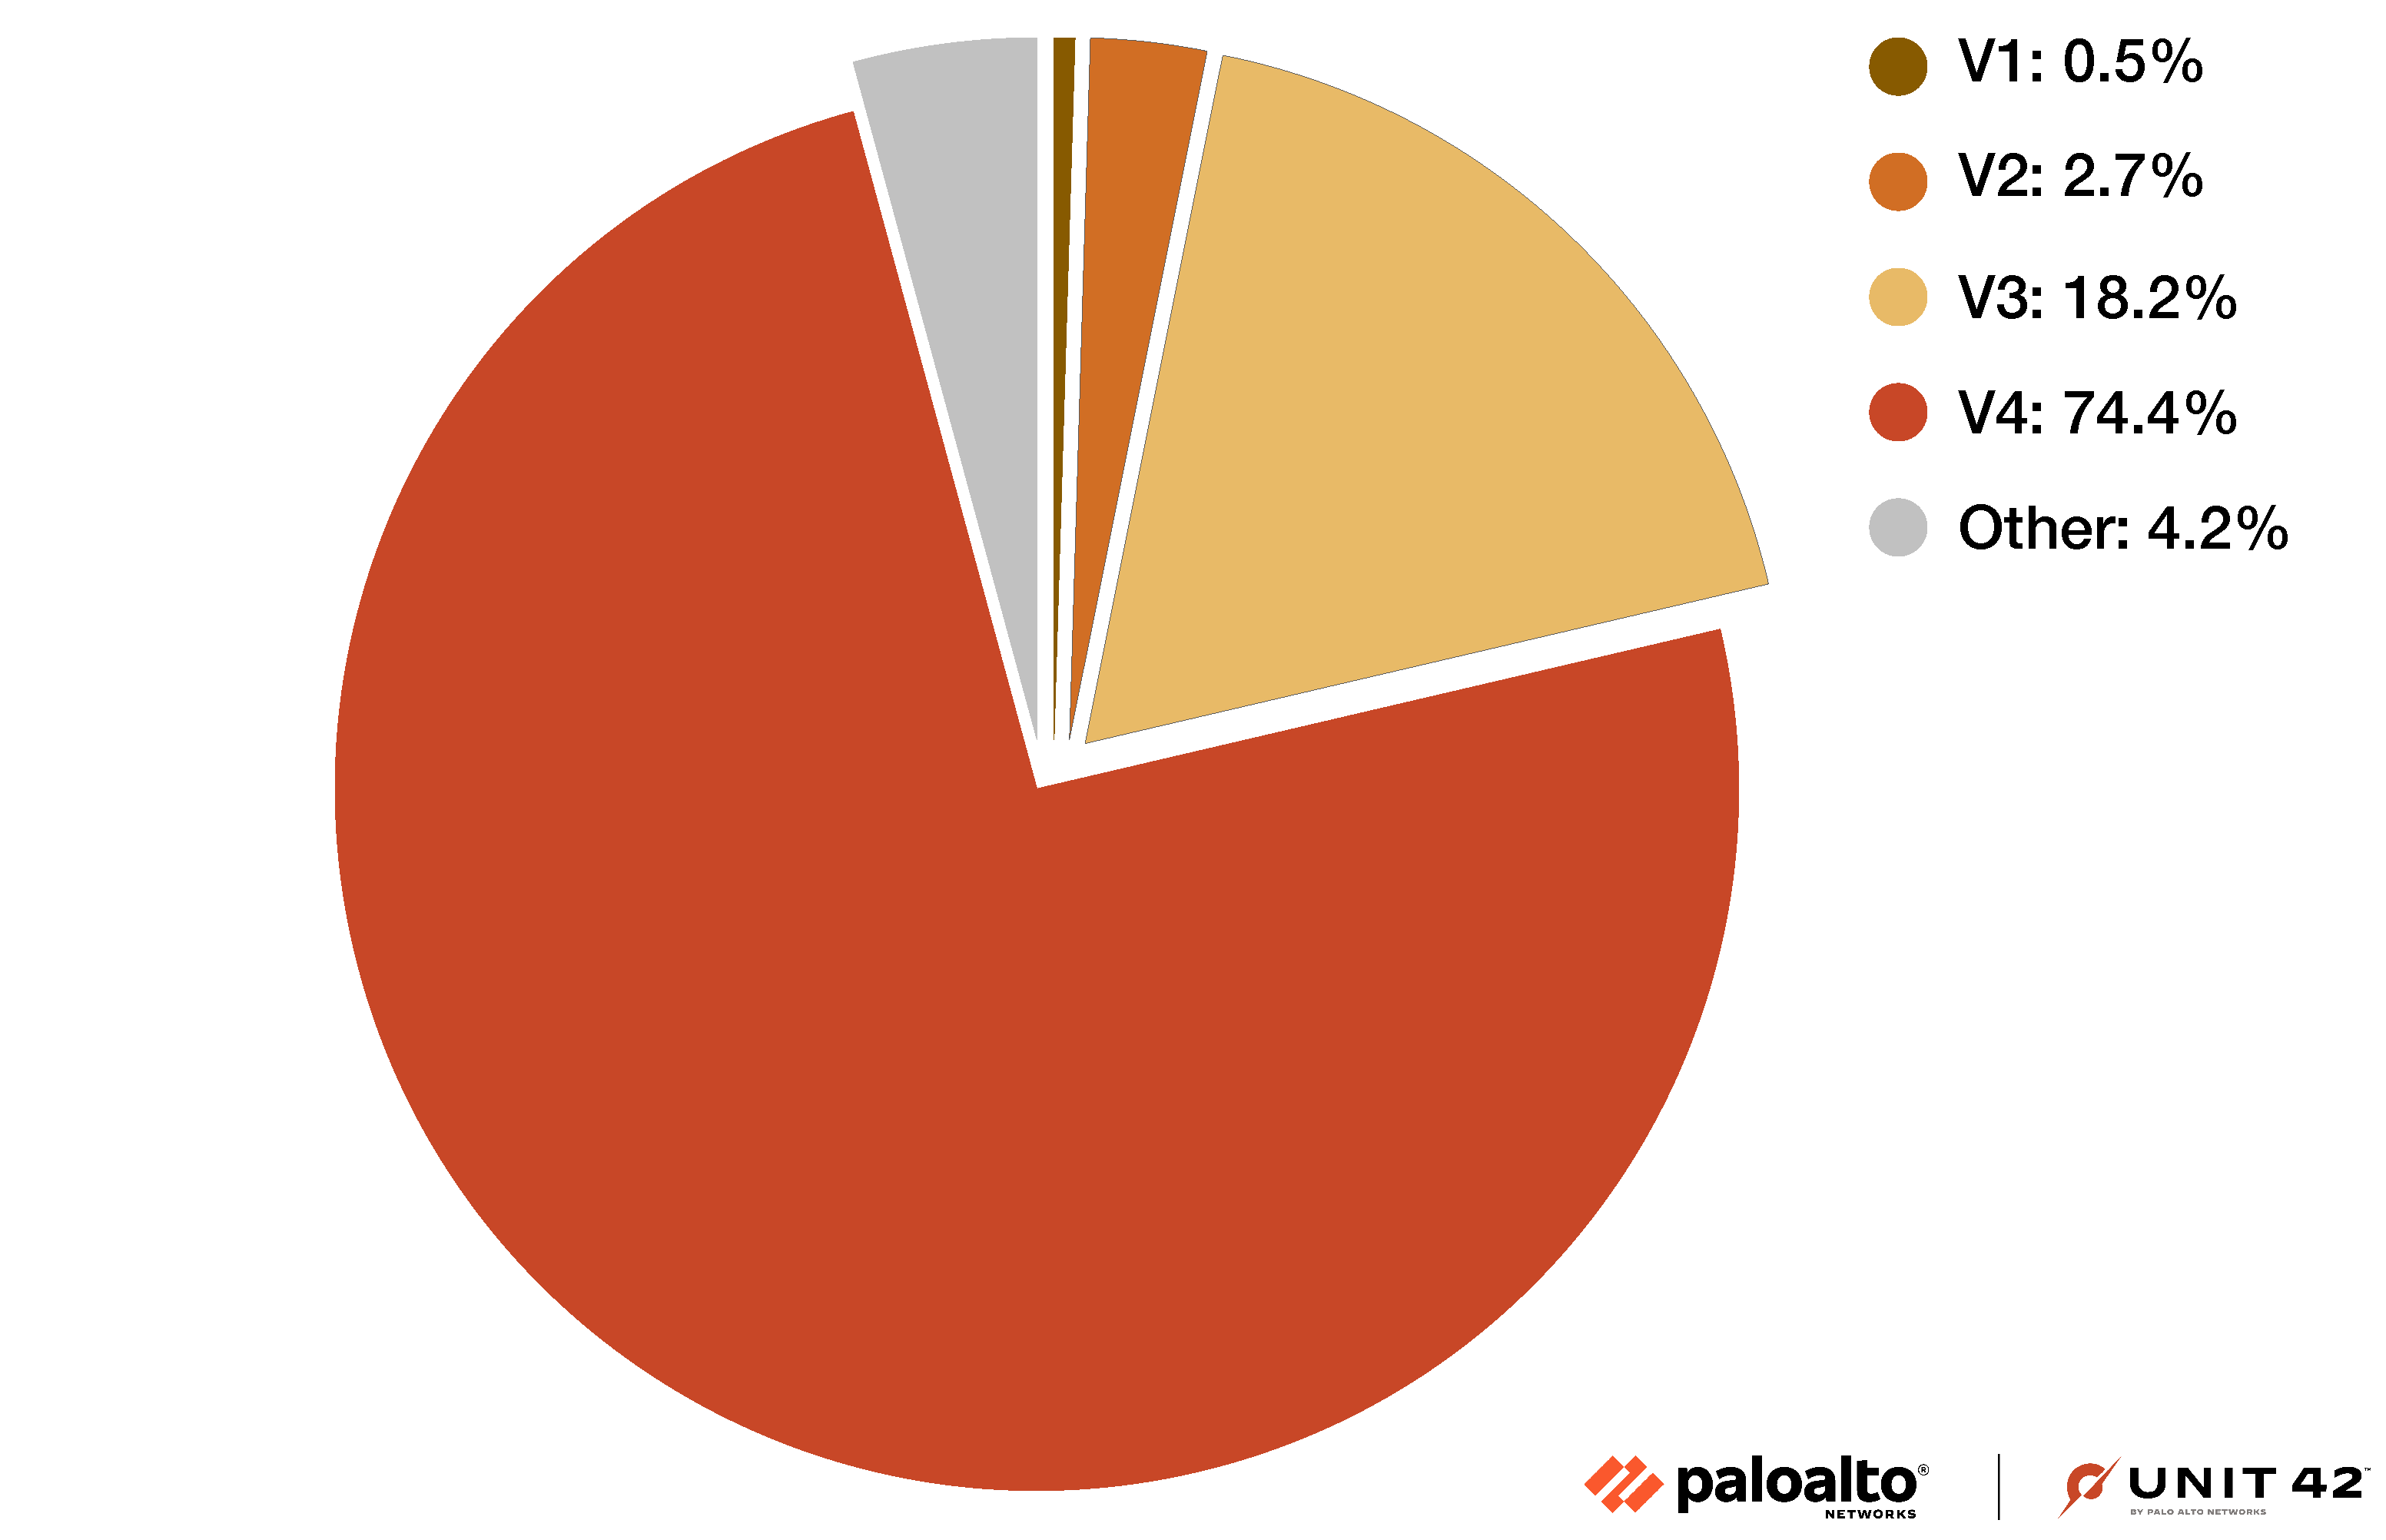 Image 2 is a pie chart of the Parrot TDS landing script distribution. Clockwise from left to right: Other is 4.2%. V1 is 0.5% is 2.7%. V3 is 18.2%. V4 is 74.4%.